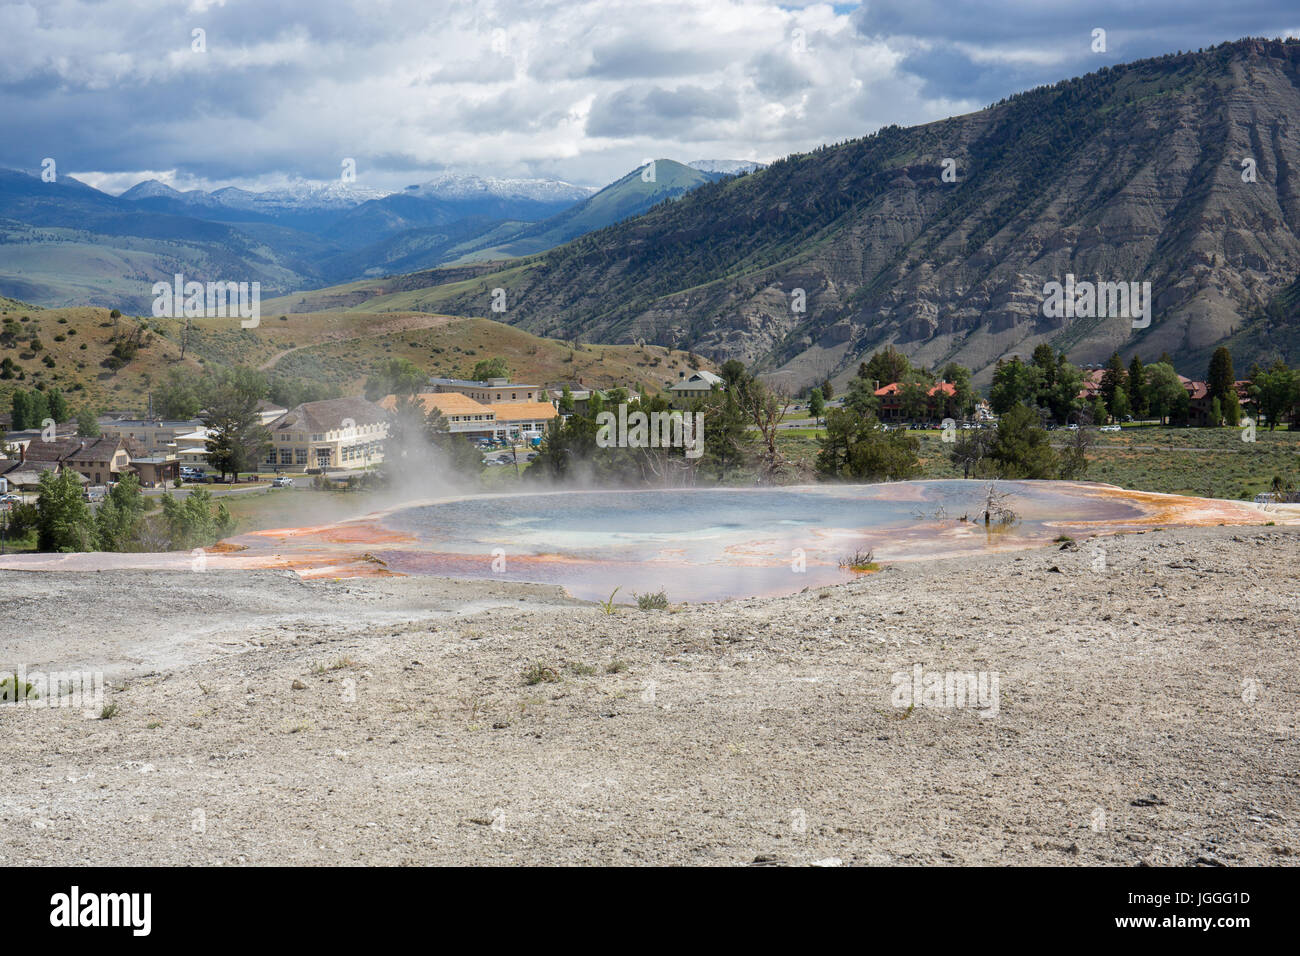 Top of Palette Spring with the town of Mammoth Hot Springs in the background, Yellowstone National Park Stock Photo